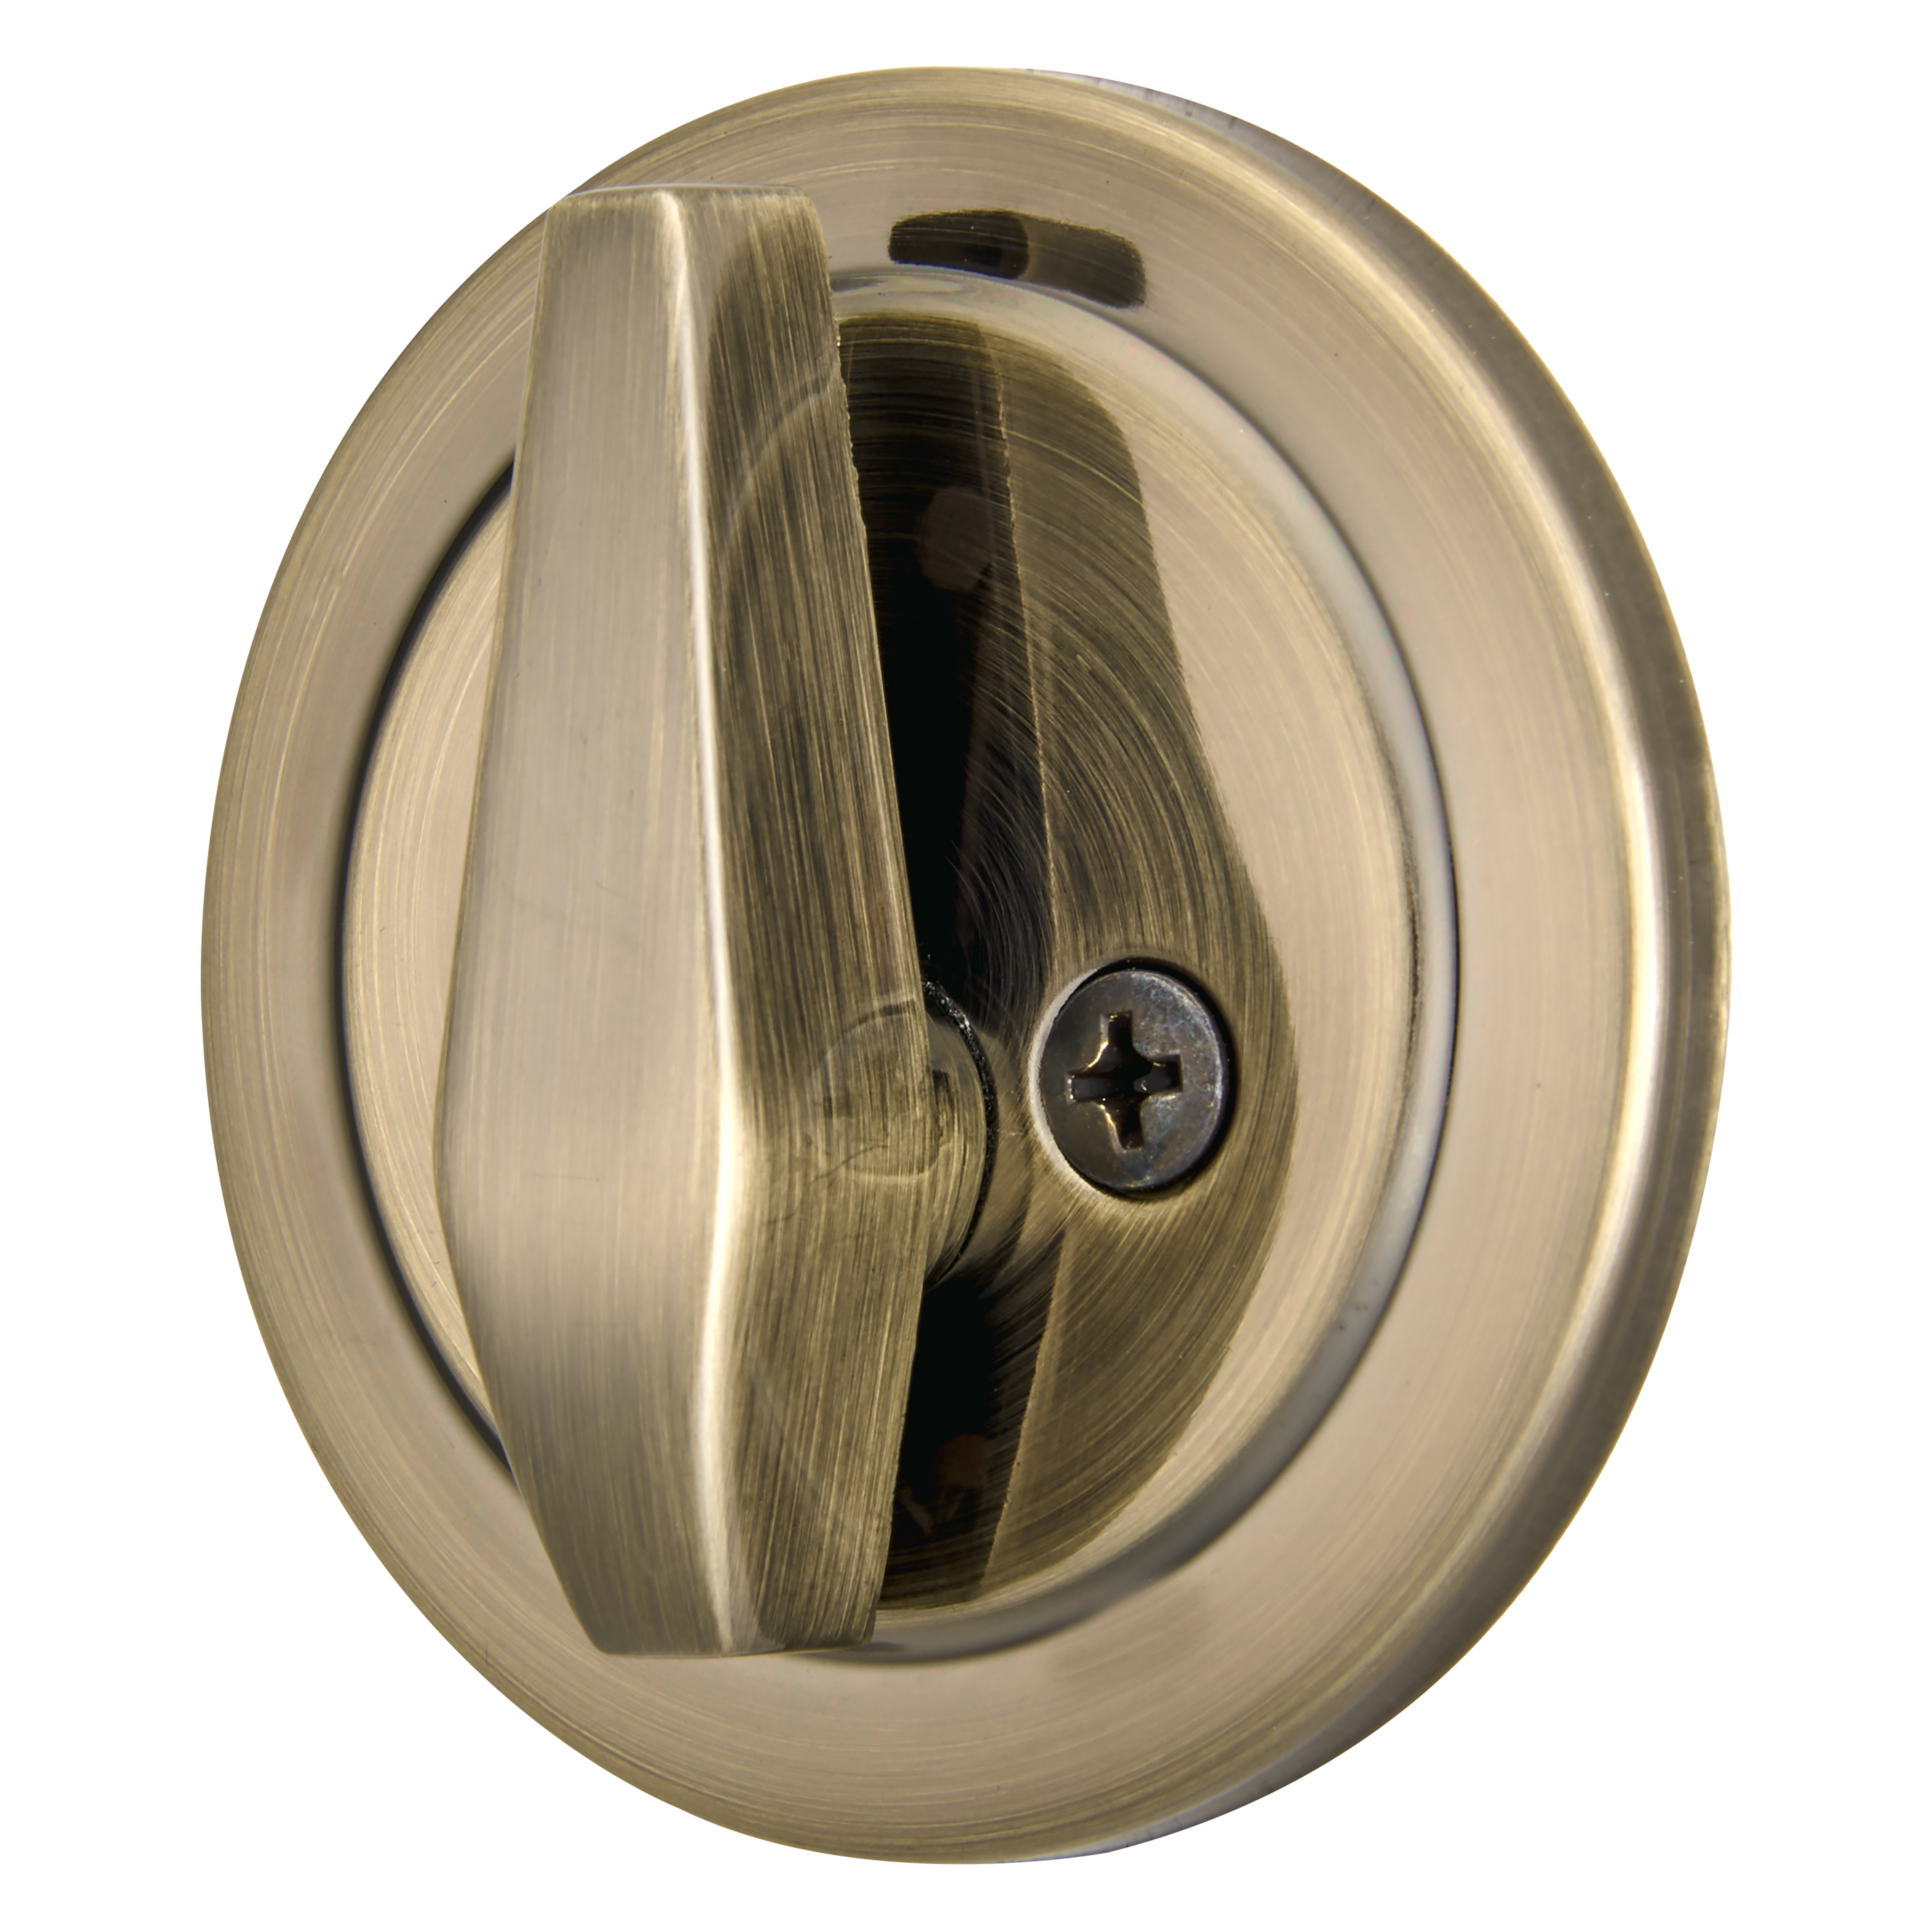 Brinks Keyed Entry Ball Style Doorknob and Deadbolt Combo, Antique Brass Finish, Twin Pack - image 5 of 15